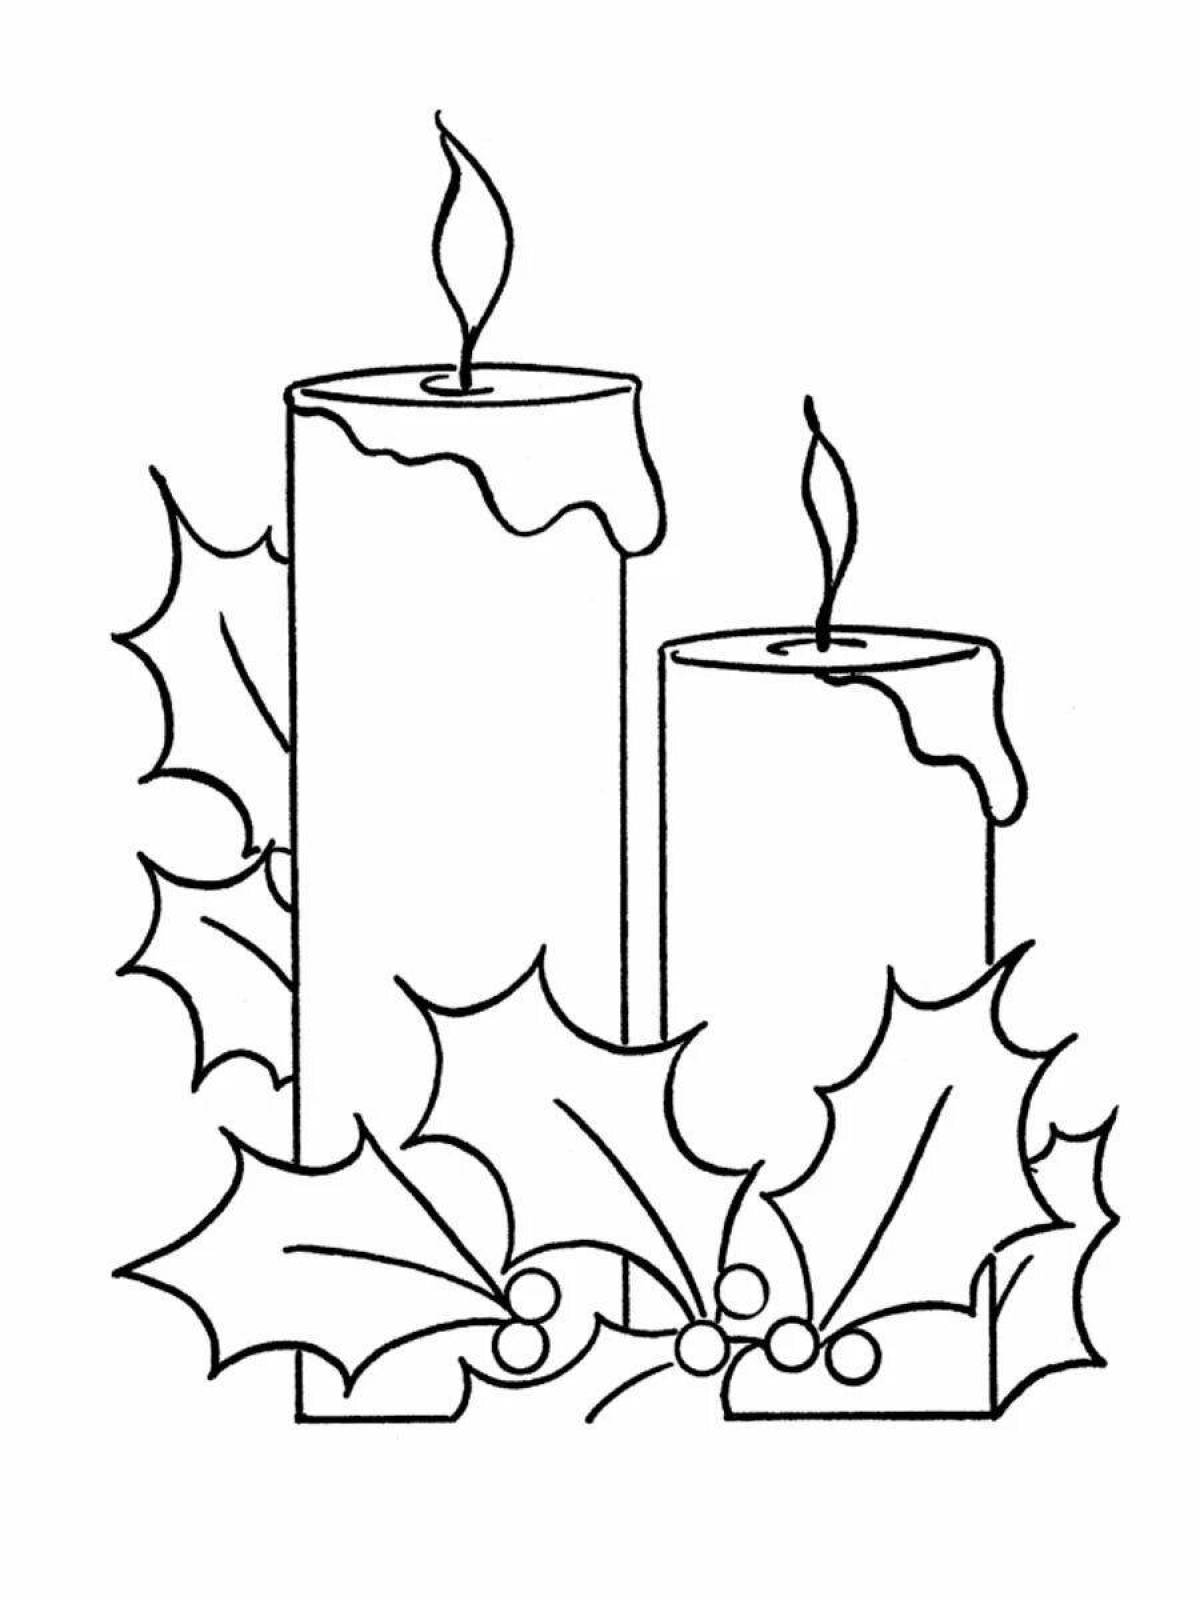 Magic Christmas candle coloring book for kids